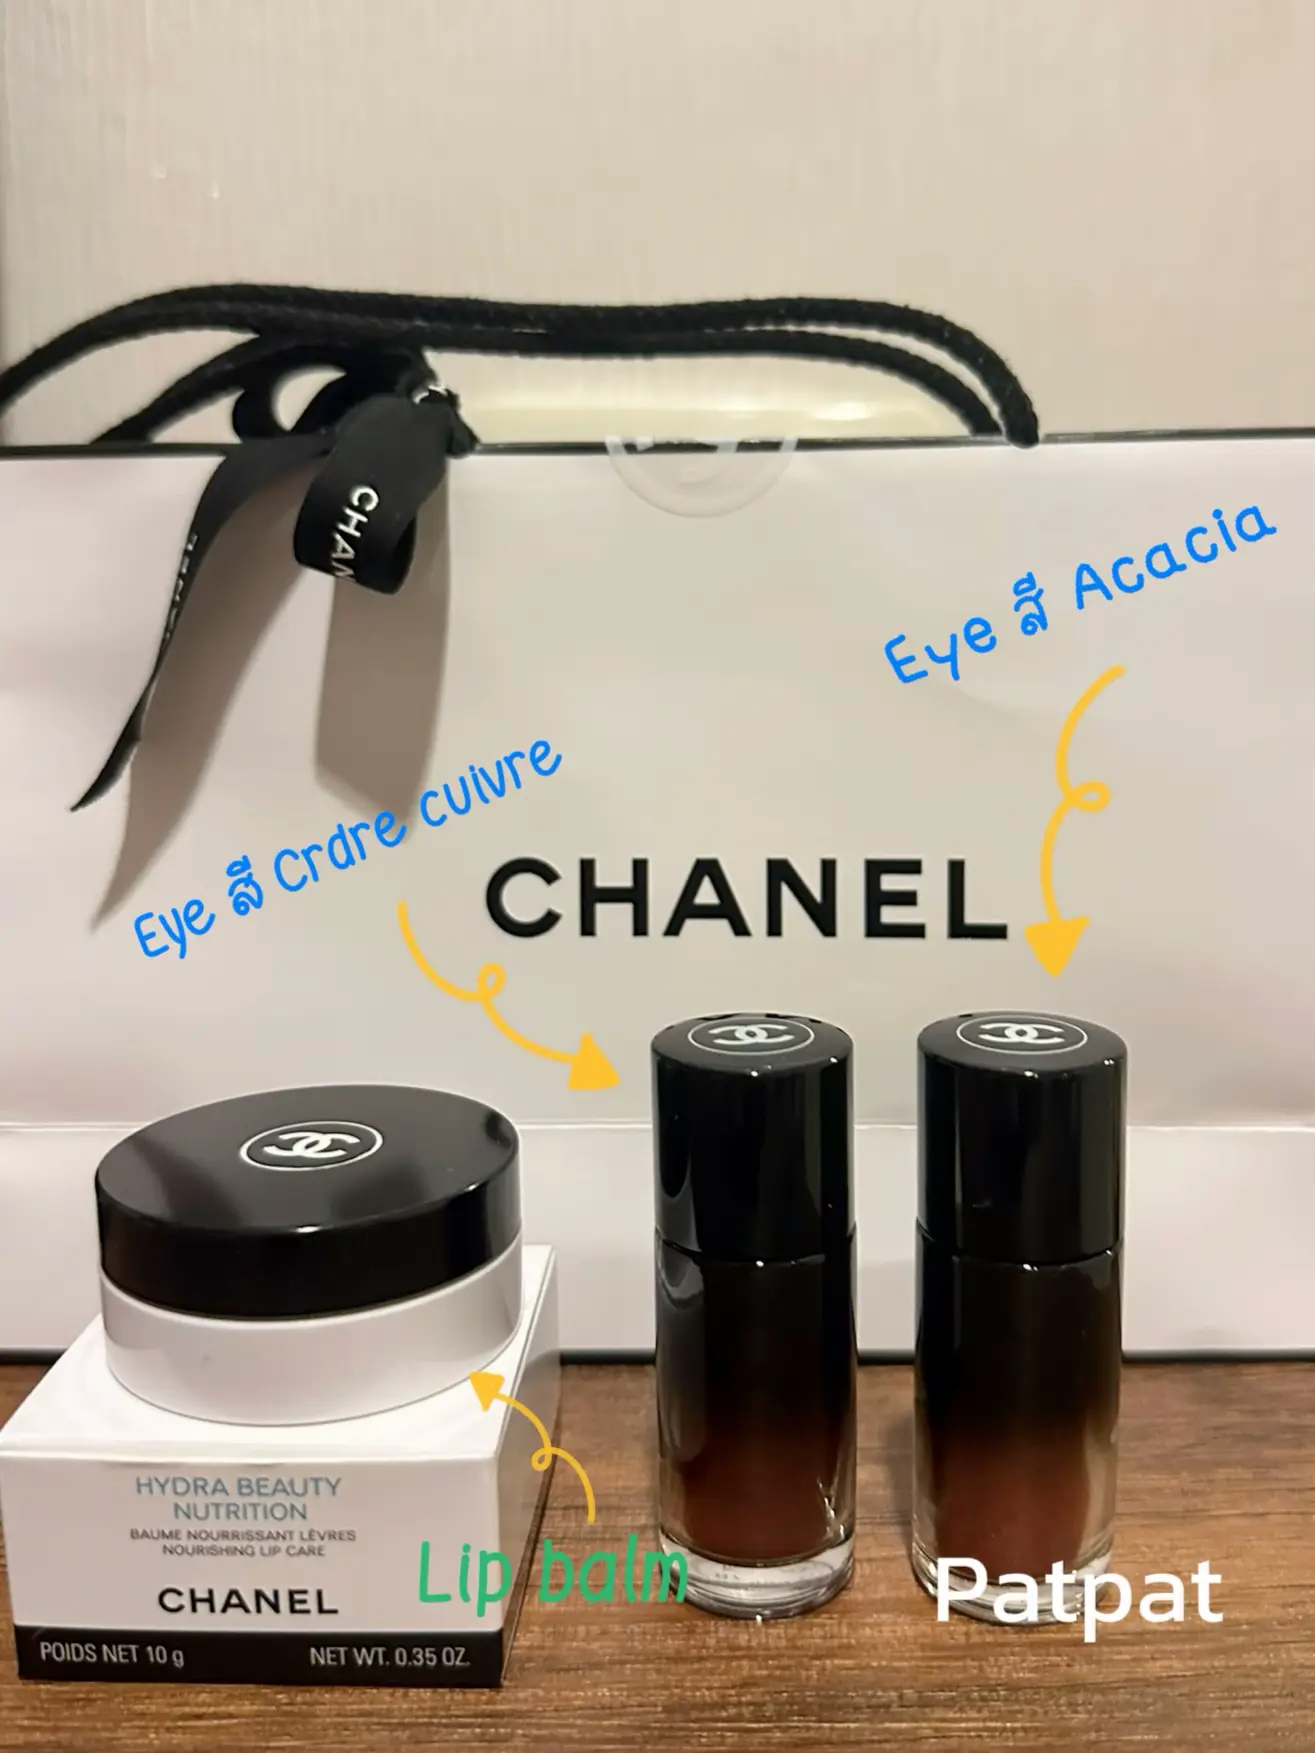 New Eye Makeup from Chanel, Gallery posted by Lazy review